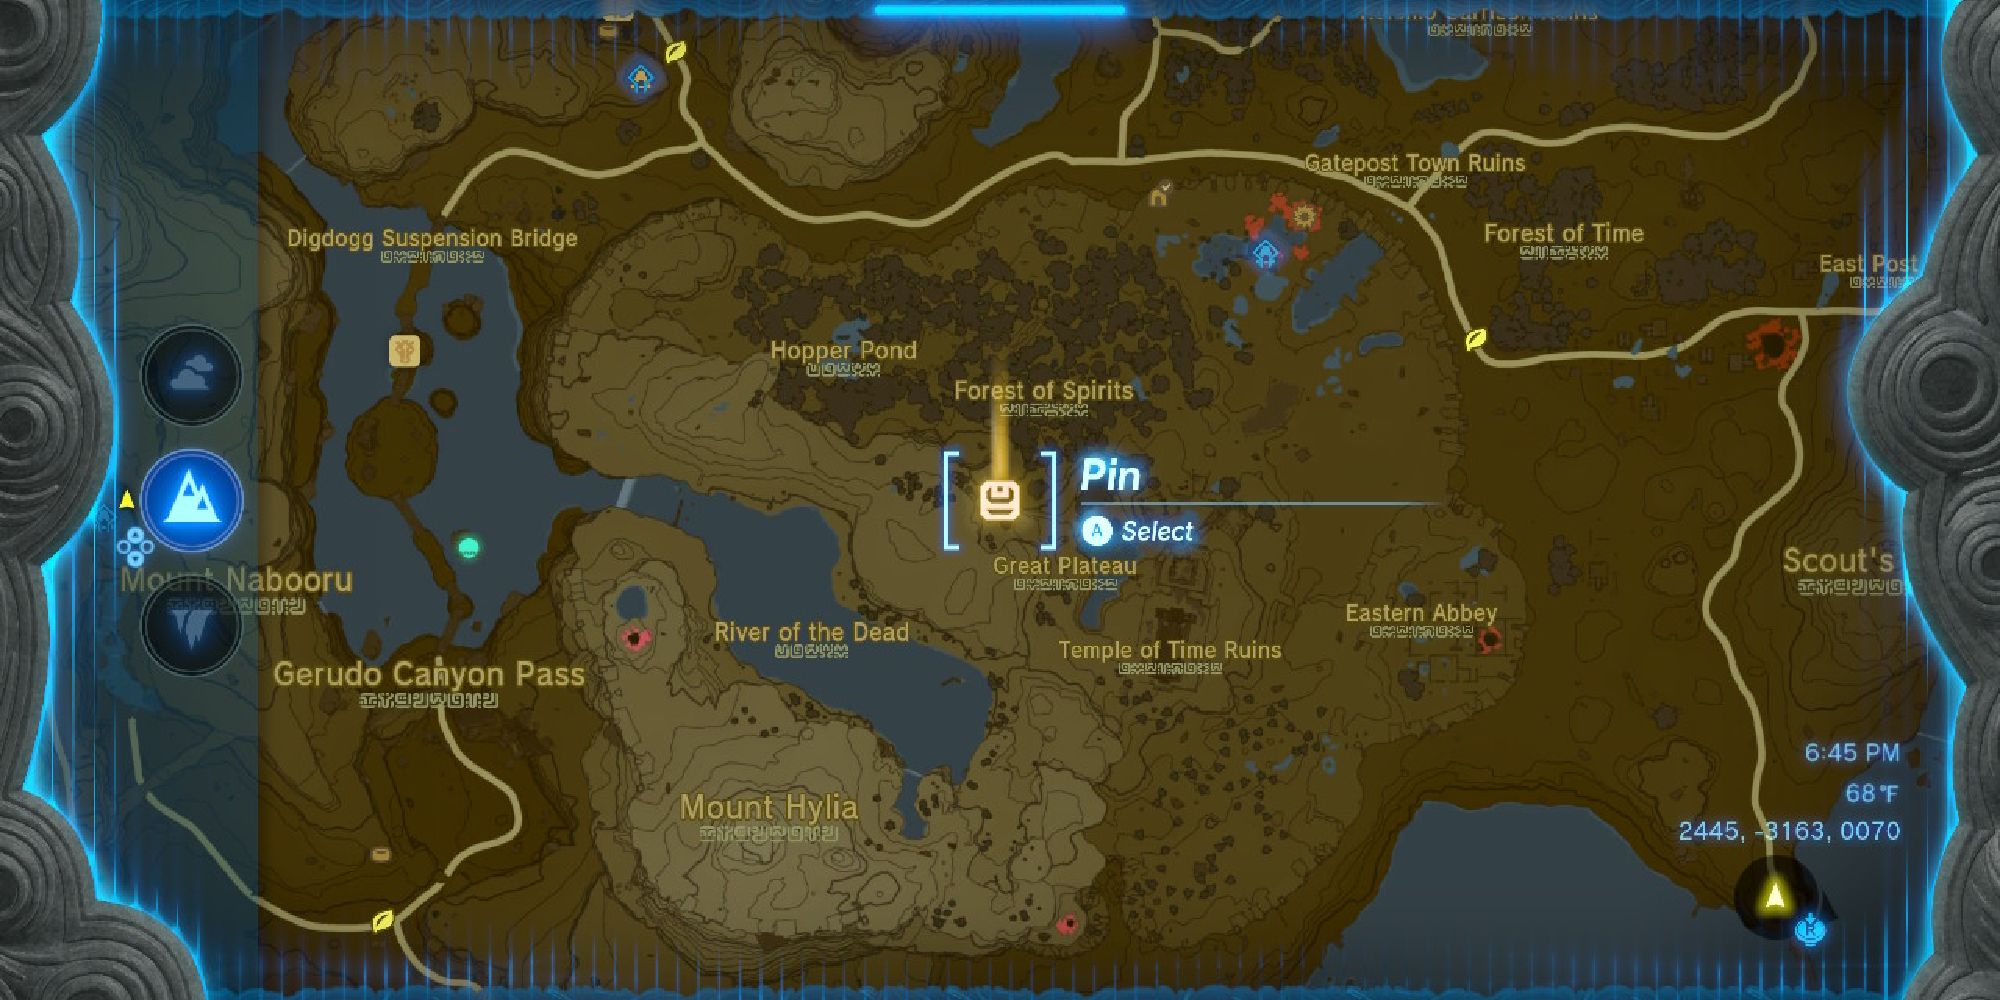 Shrine of Resurrection from Breath of the Wild shown on tears of the kingdom map